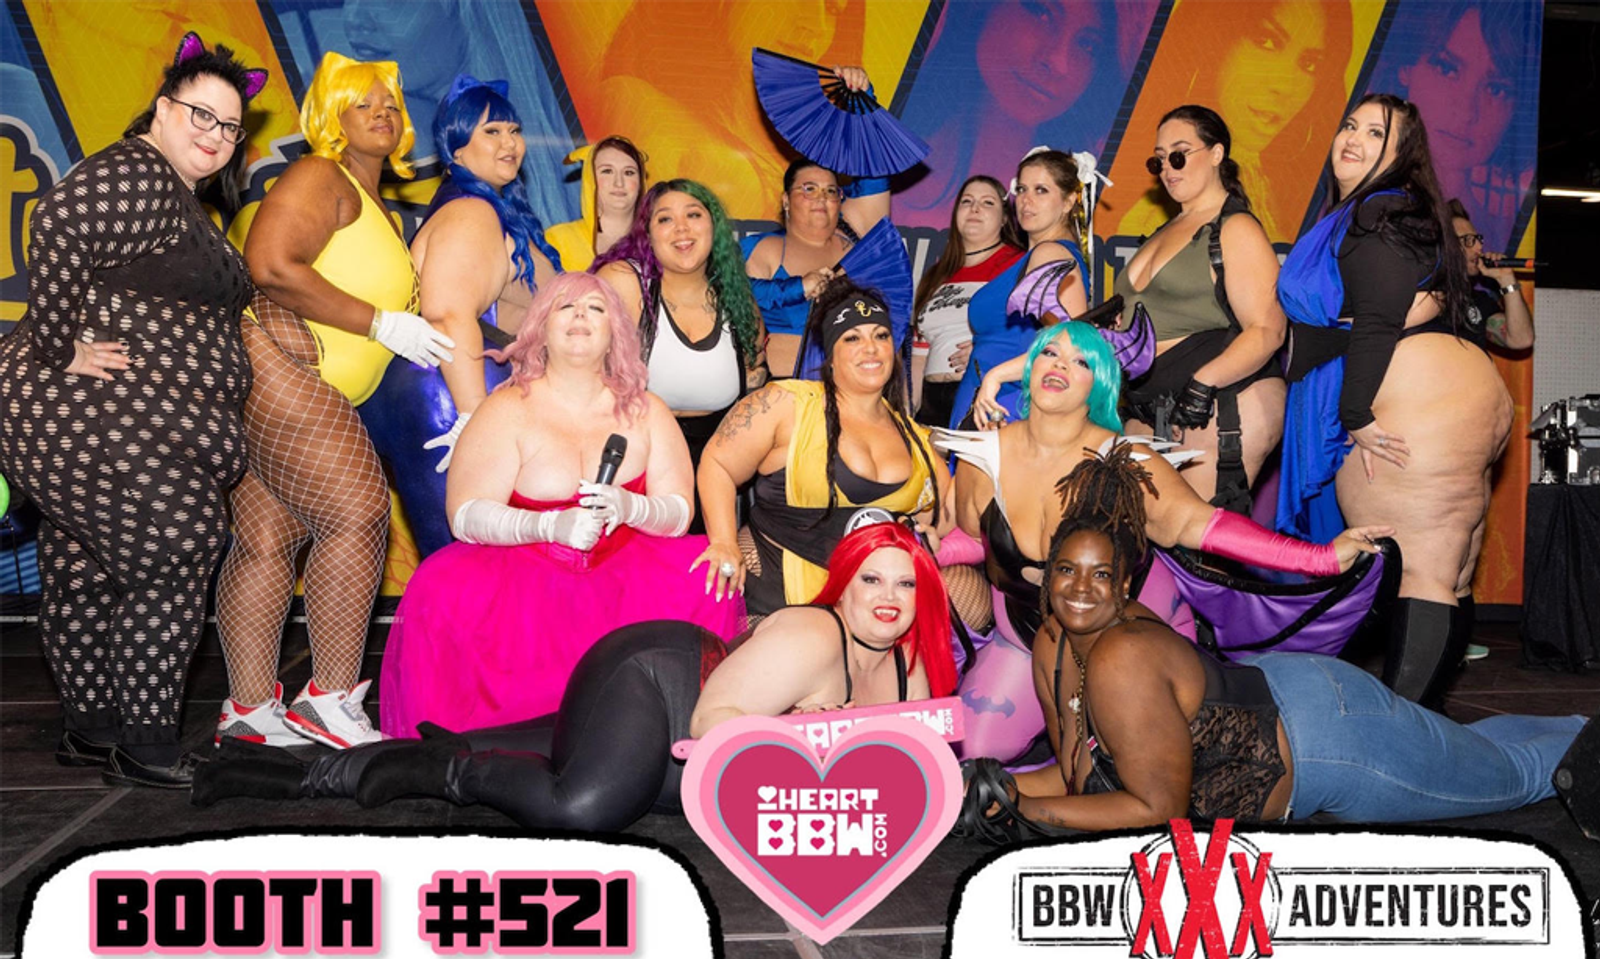 IHeartBBW to Host Booth at Exxxotica Expo in Miami